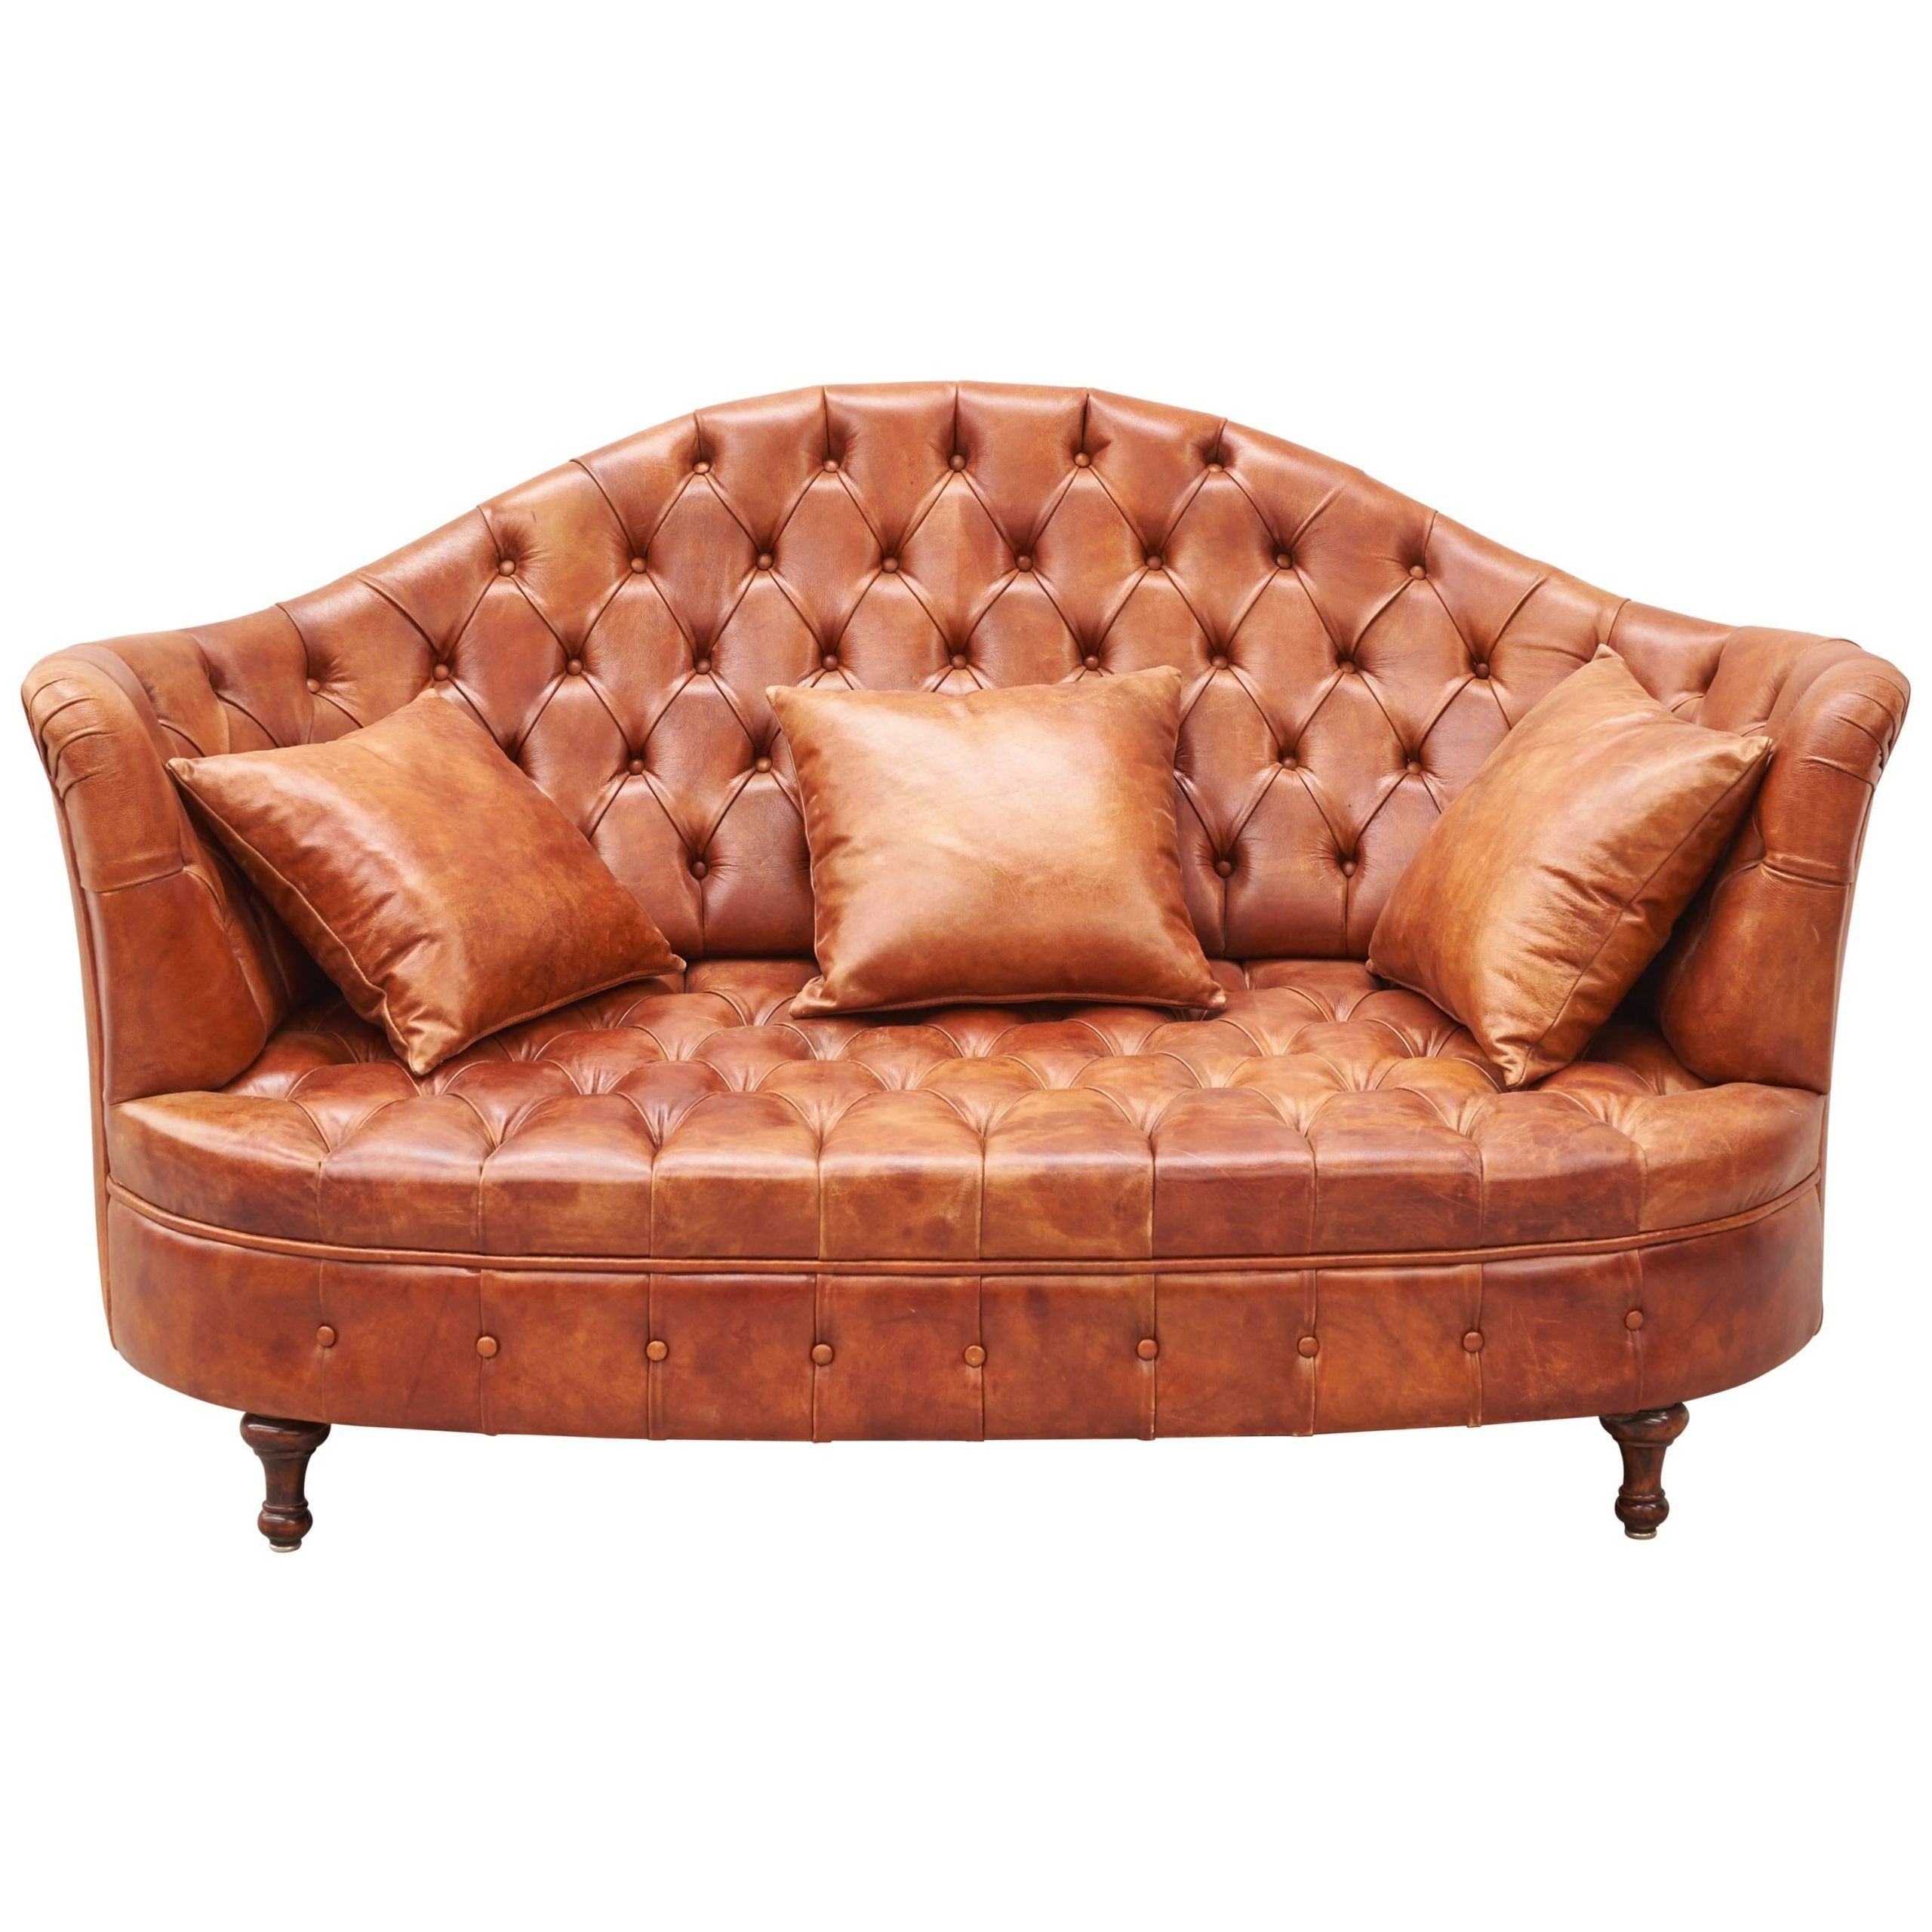 Burgundy Leather Chesterfield Sofa At 1stdibs | Burgundy Chesterfield For Chesterfield Sofas (View 14 of 20)